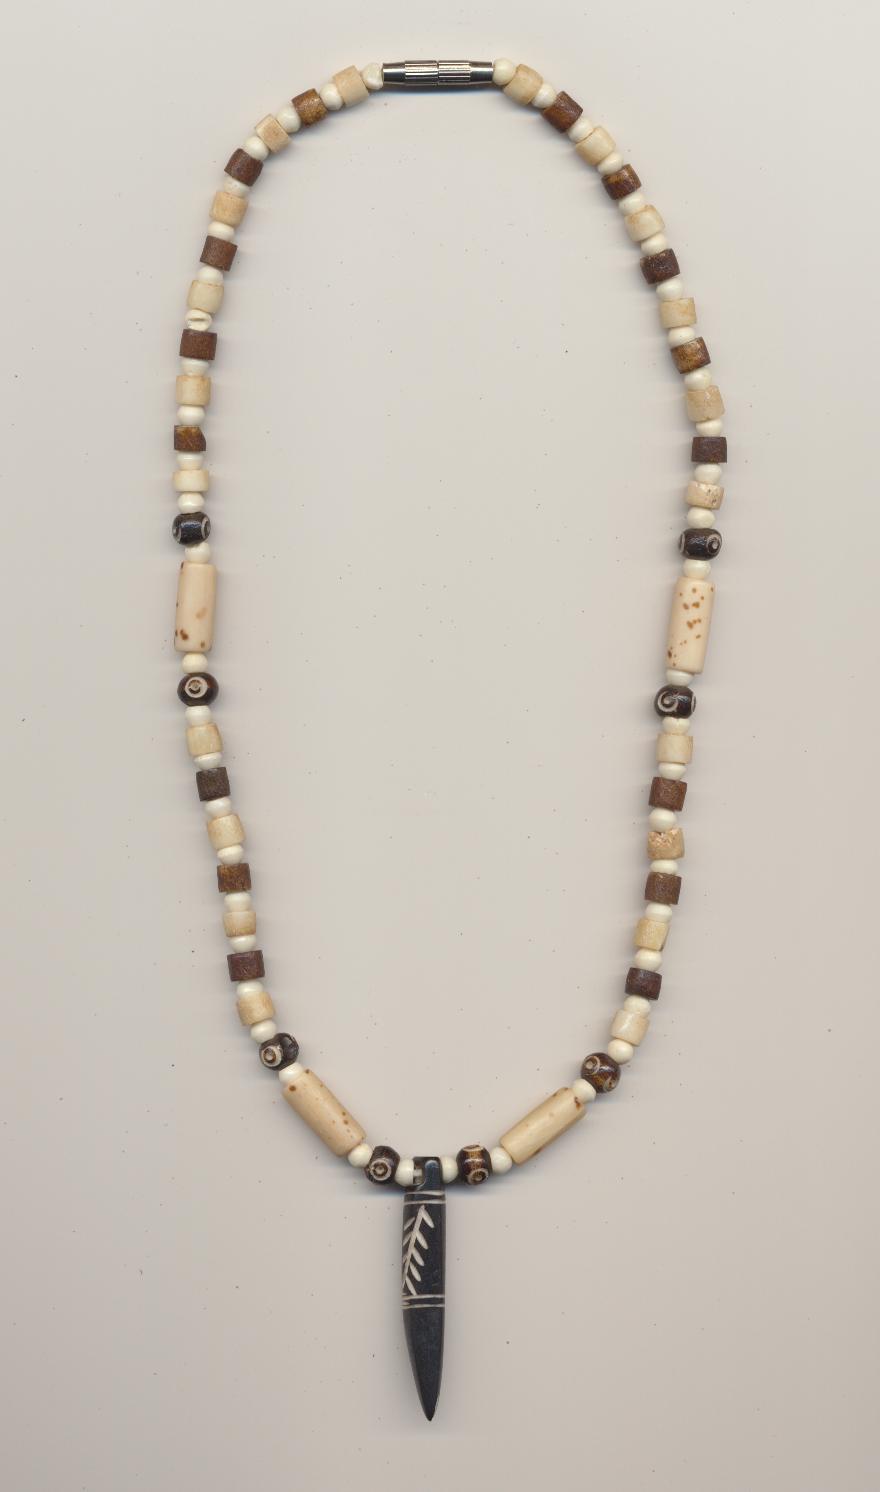 Necklace for boys made of bleached, dyed and with eye motif carved bone beads, with carved decorated bone animal toothlike pendant, India, 1990's, length necklace 19'' 48cm., pendant 2'' 4.5cm.